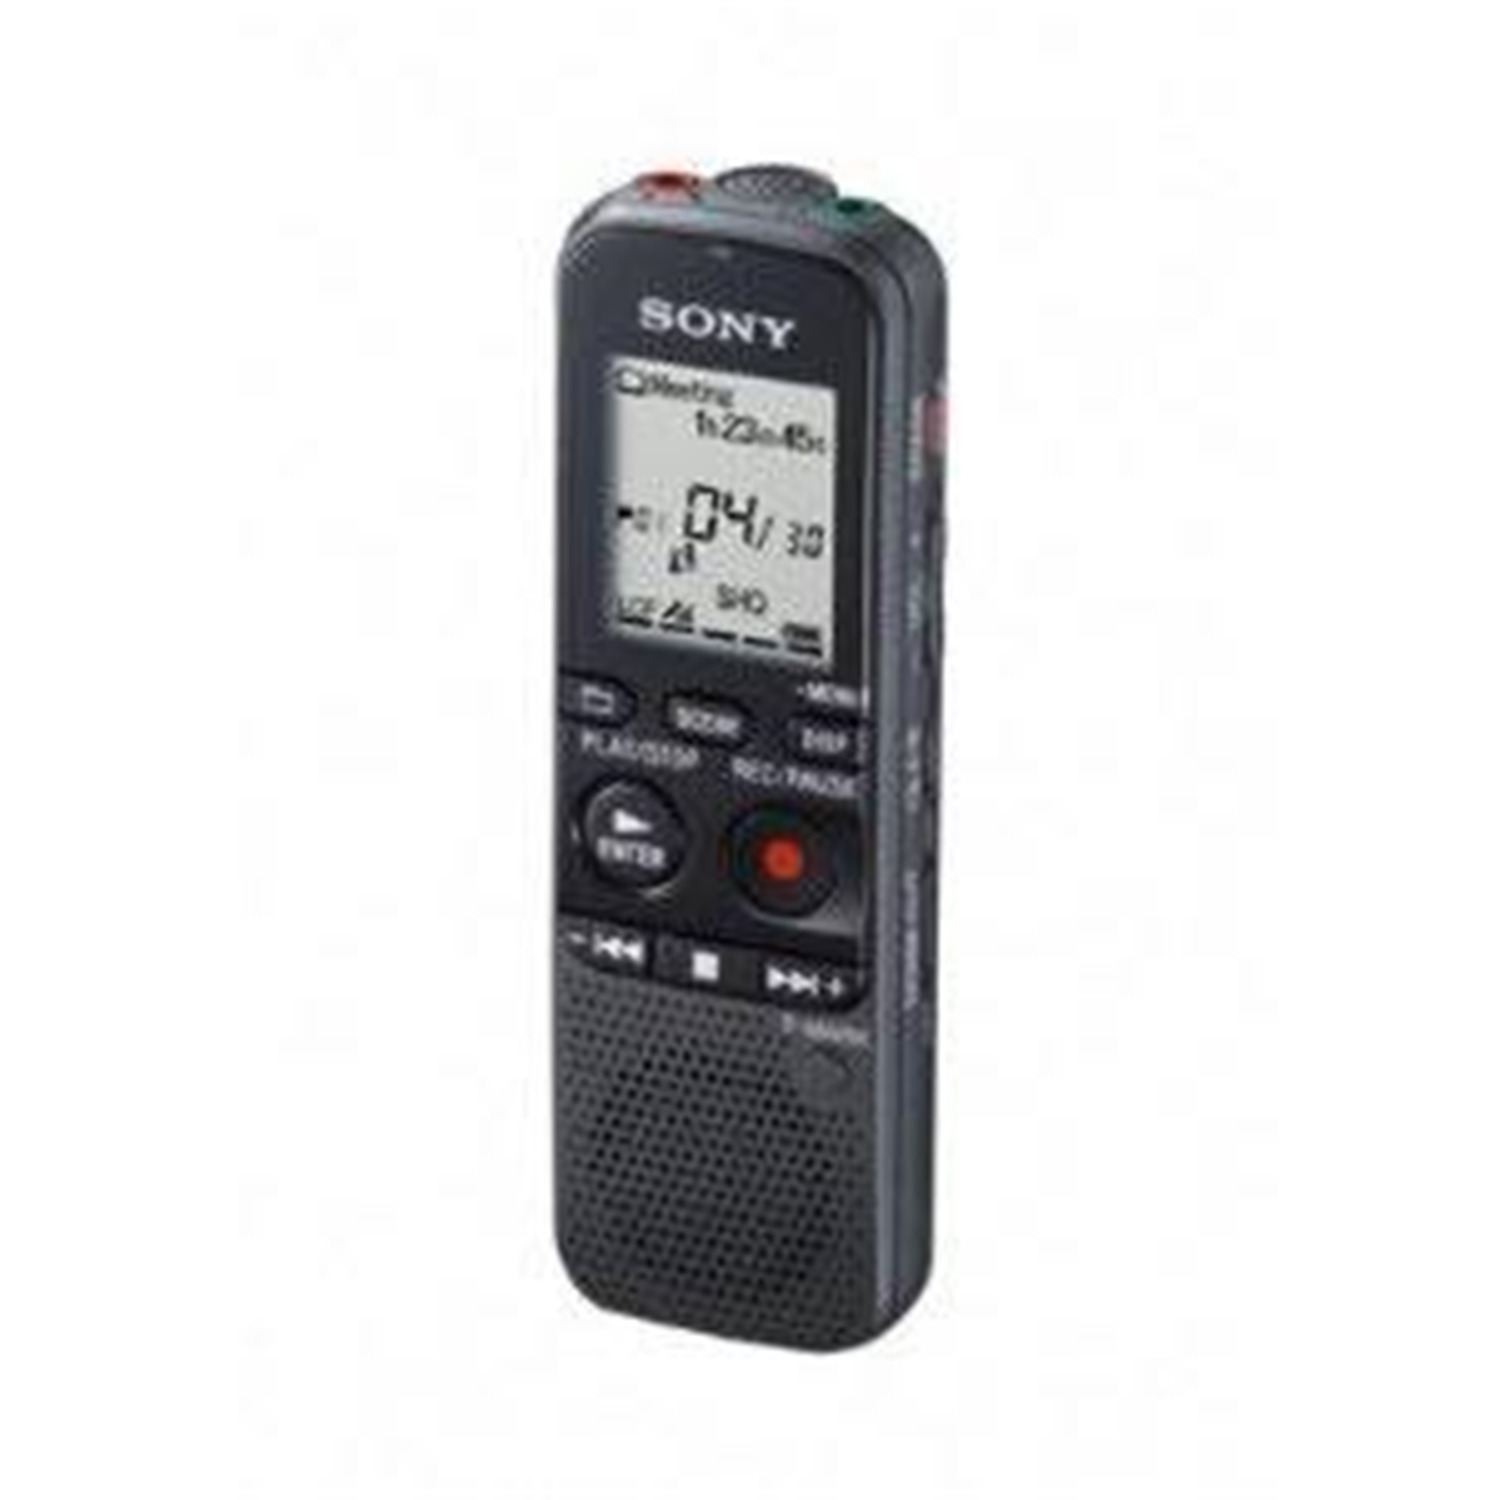 Sony Notetakers 2GB Digital Voice Recorder with LCD Display, ICD-PX312 - image 1 of 2